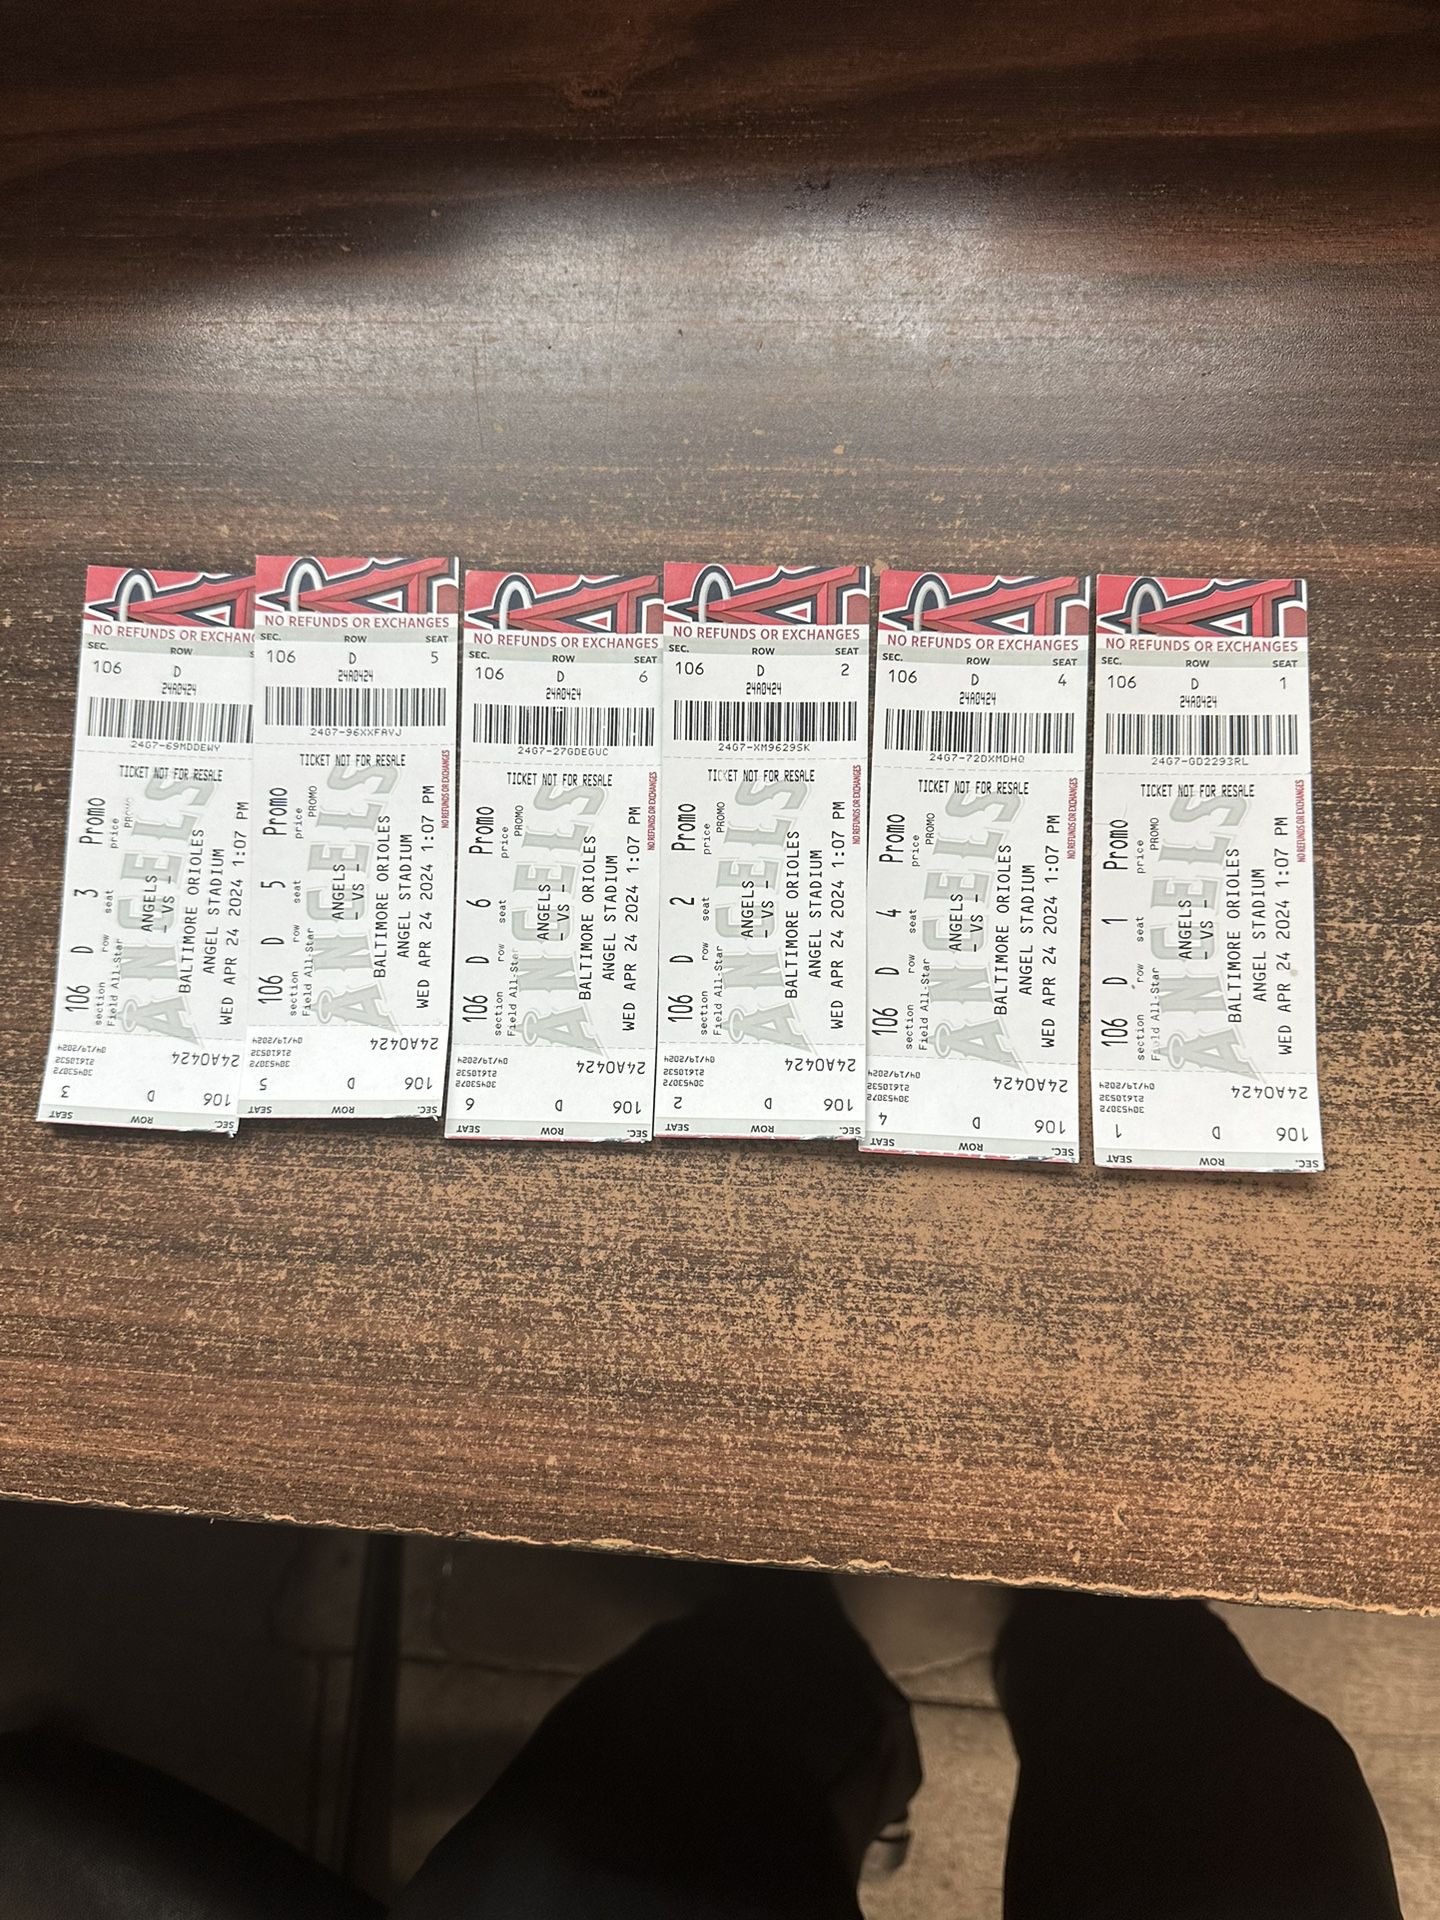 Angels Tickets 